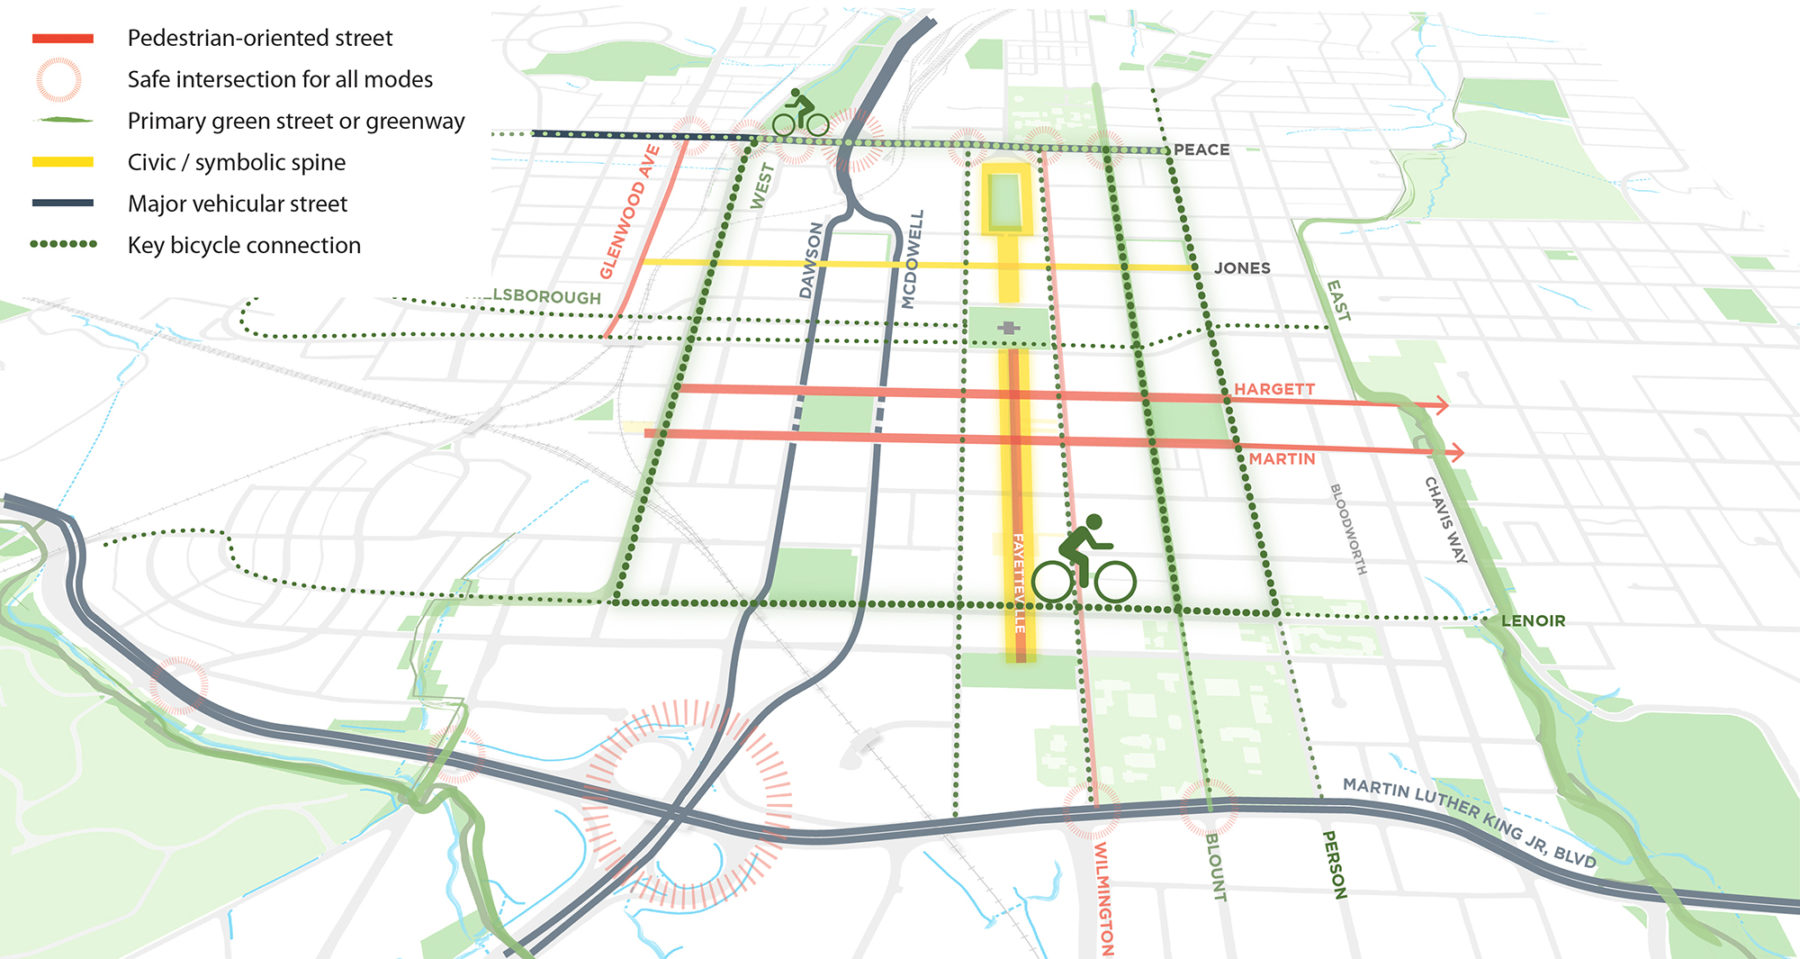 Site plan of circulation routes, including: pedestrian-oriented street, safe intersection for all modes, primary green street or greenway, civic/symbolic spine, major vehicular street, and key bicycle connection.